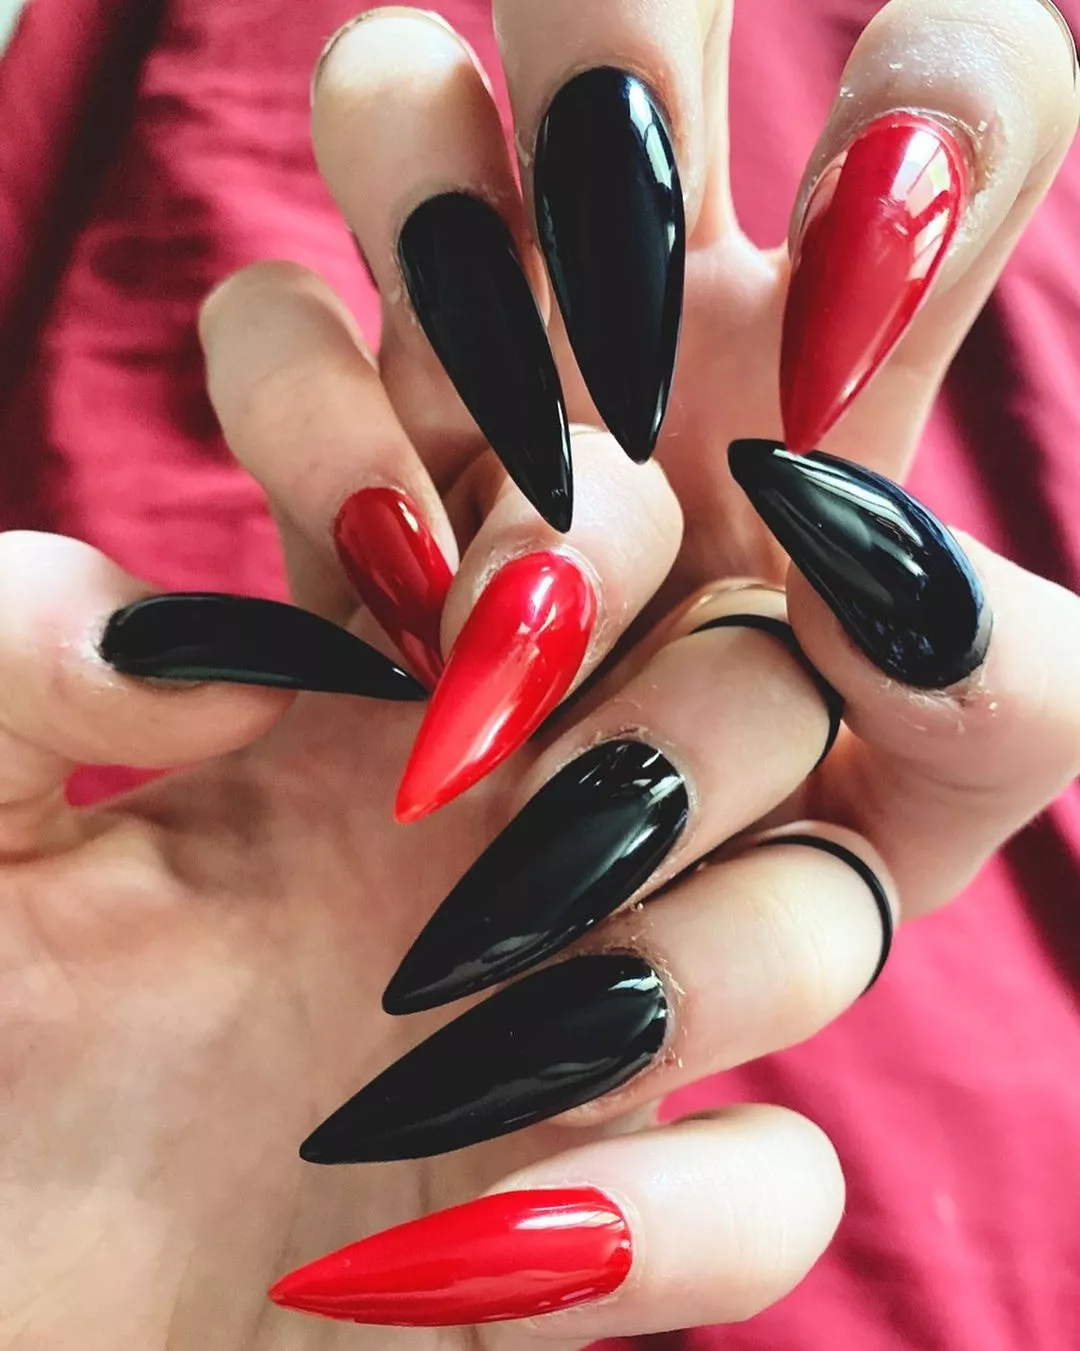 Red And Black Is Such A Good Combo Nudes Nailfetish Nude Pics Org